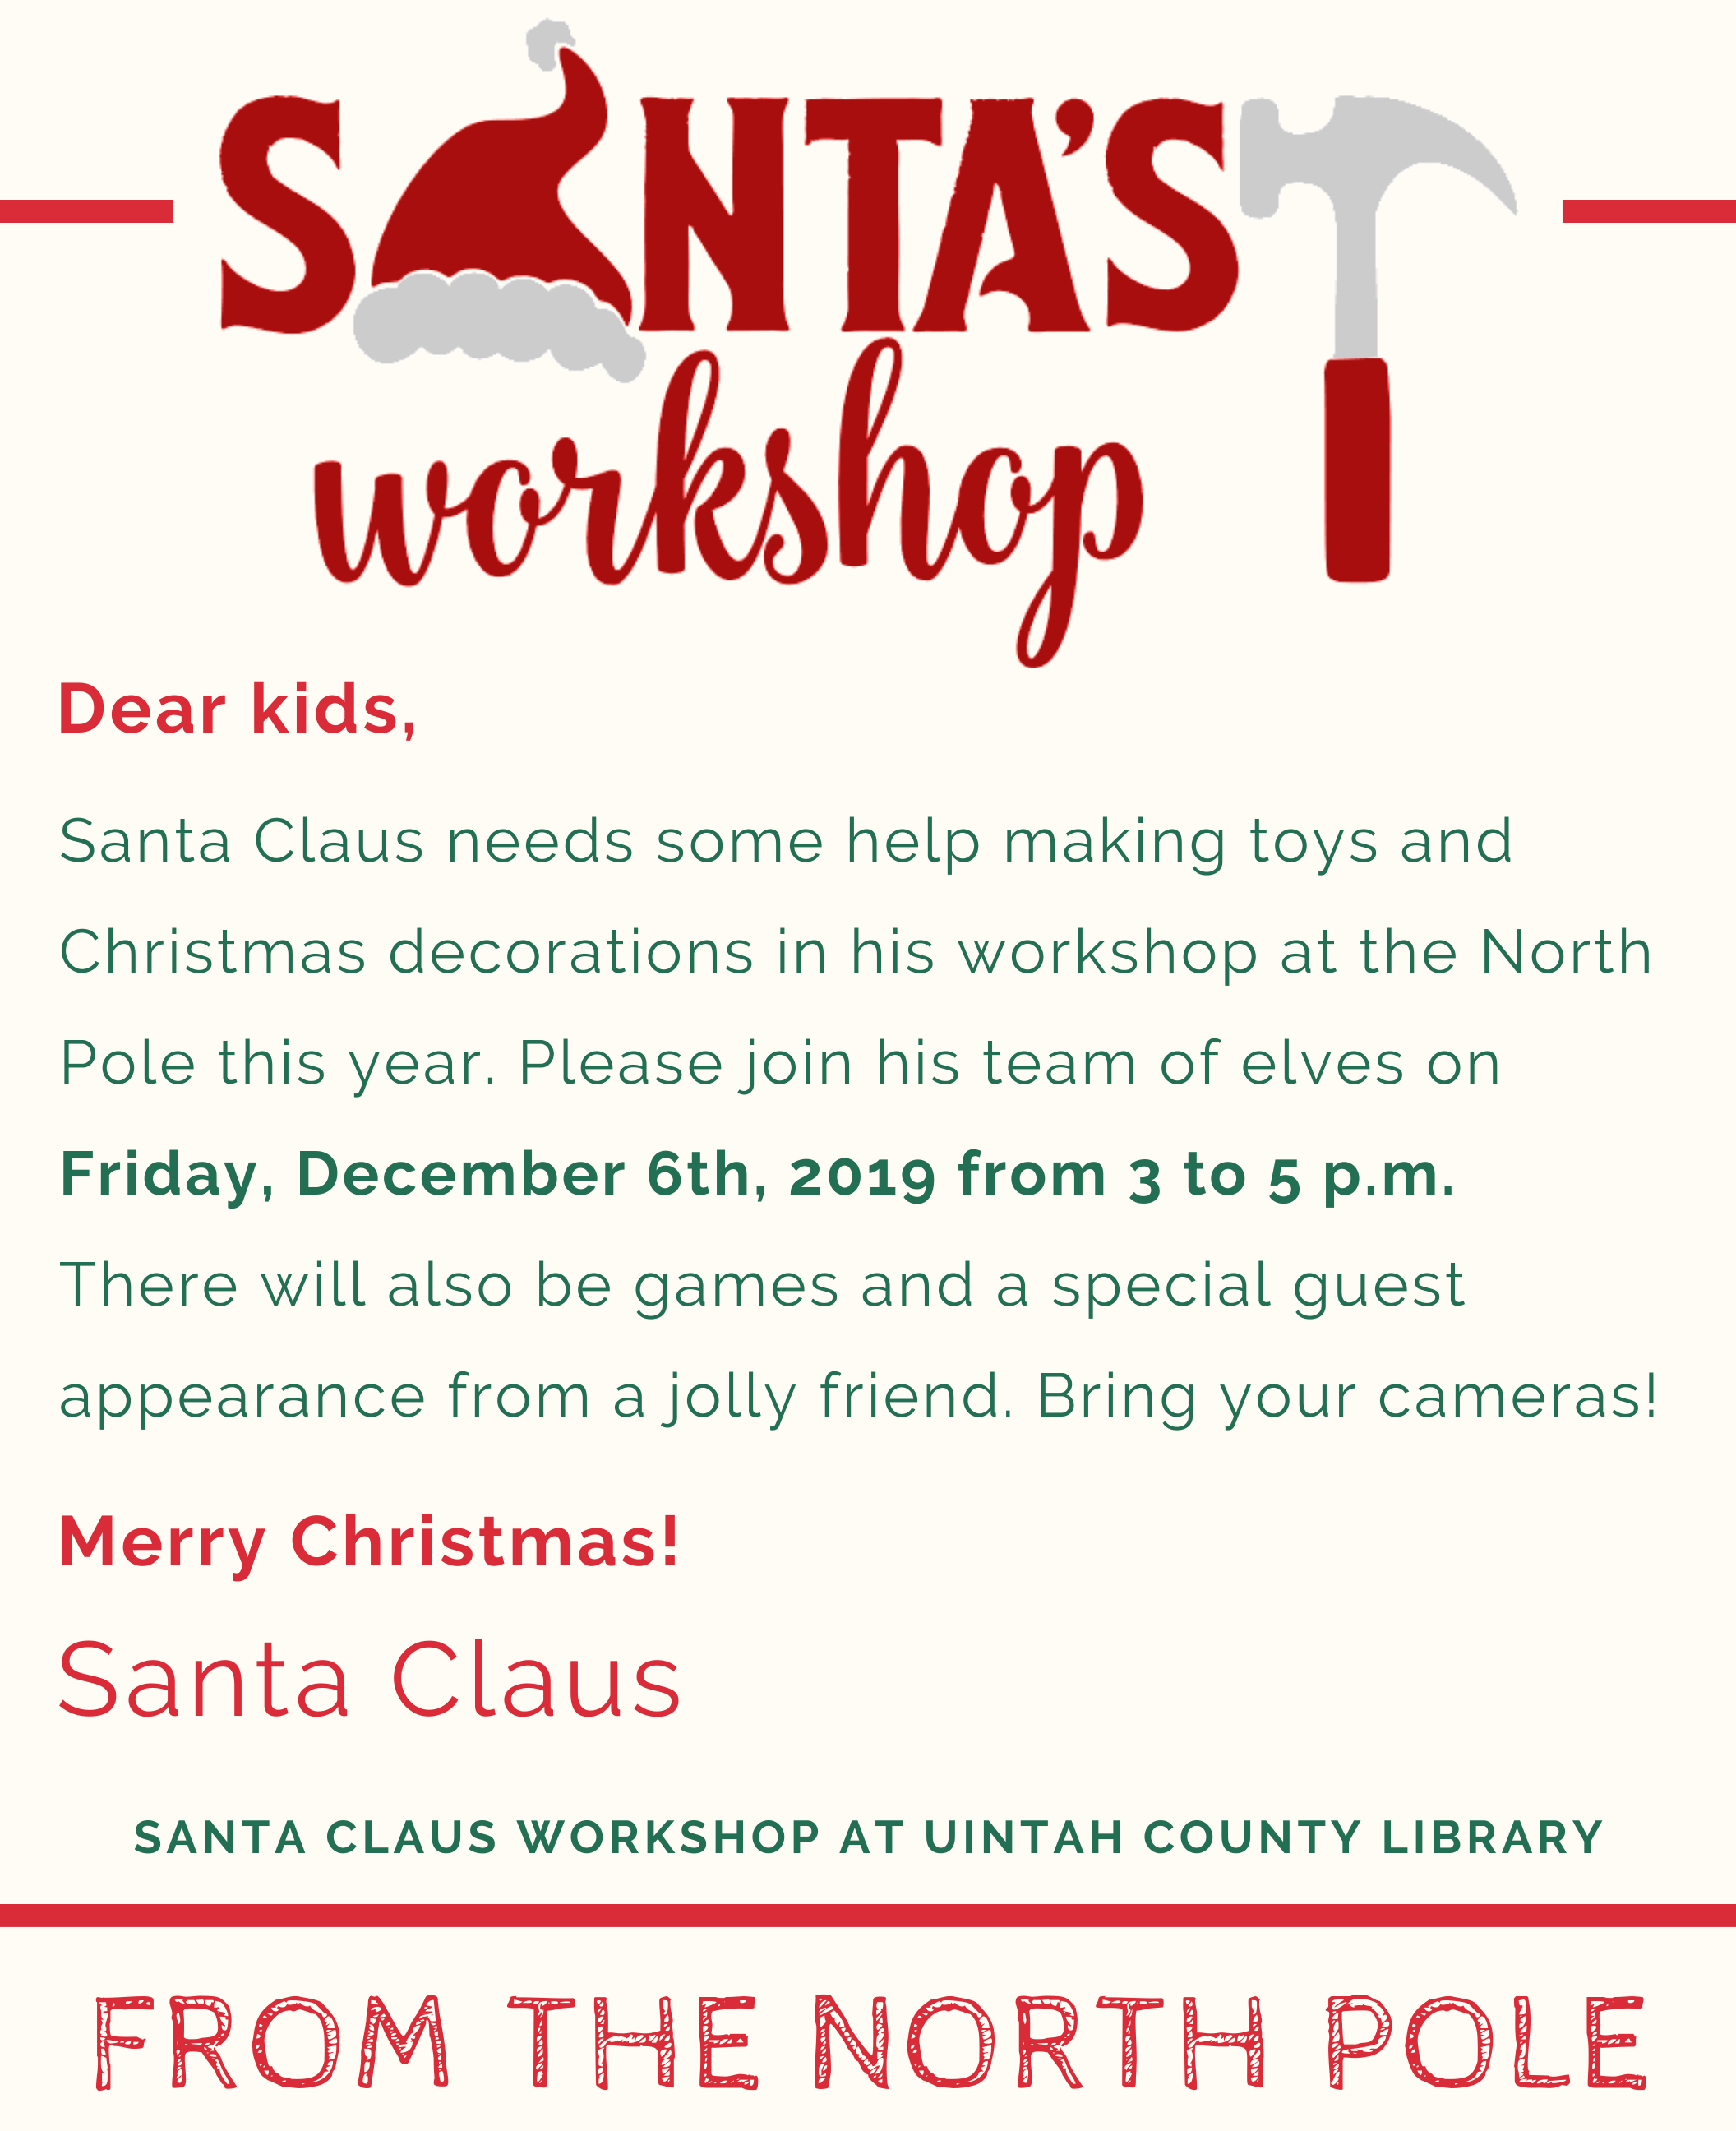 Santa's Workshop: Dear Kids, Santa Claus needs some help making toys and Christmas decorations in his workshop at the North Pole this year. Please join his team of elves on Friday, December 6th, 2019 from 3 to 5 p.m. There will also be games and a special guest appearance from a jolly friend. Bring your cameras! Merry Christmas! Santa Claus: Santa Claus workshop at Uintah County Library, from the North Pole